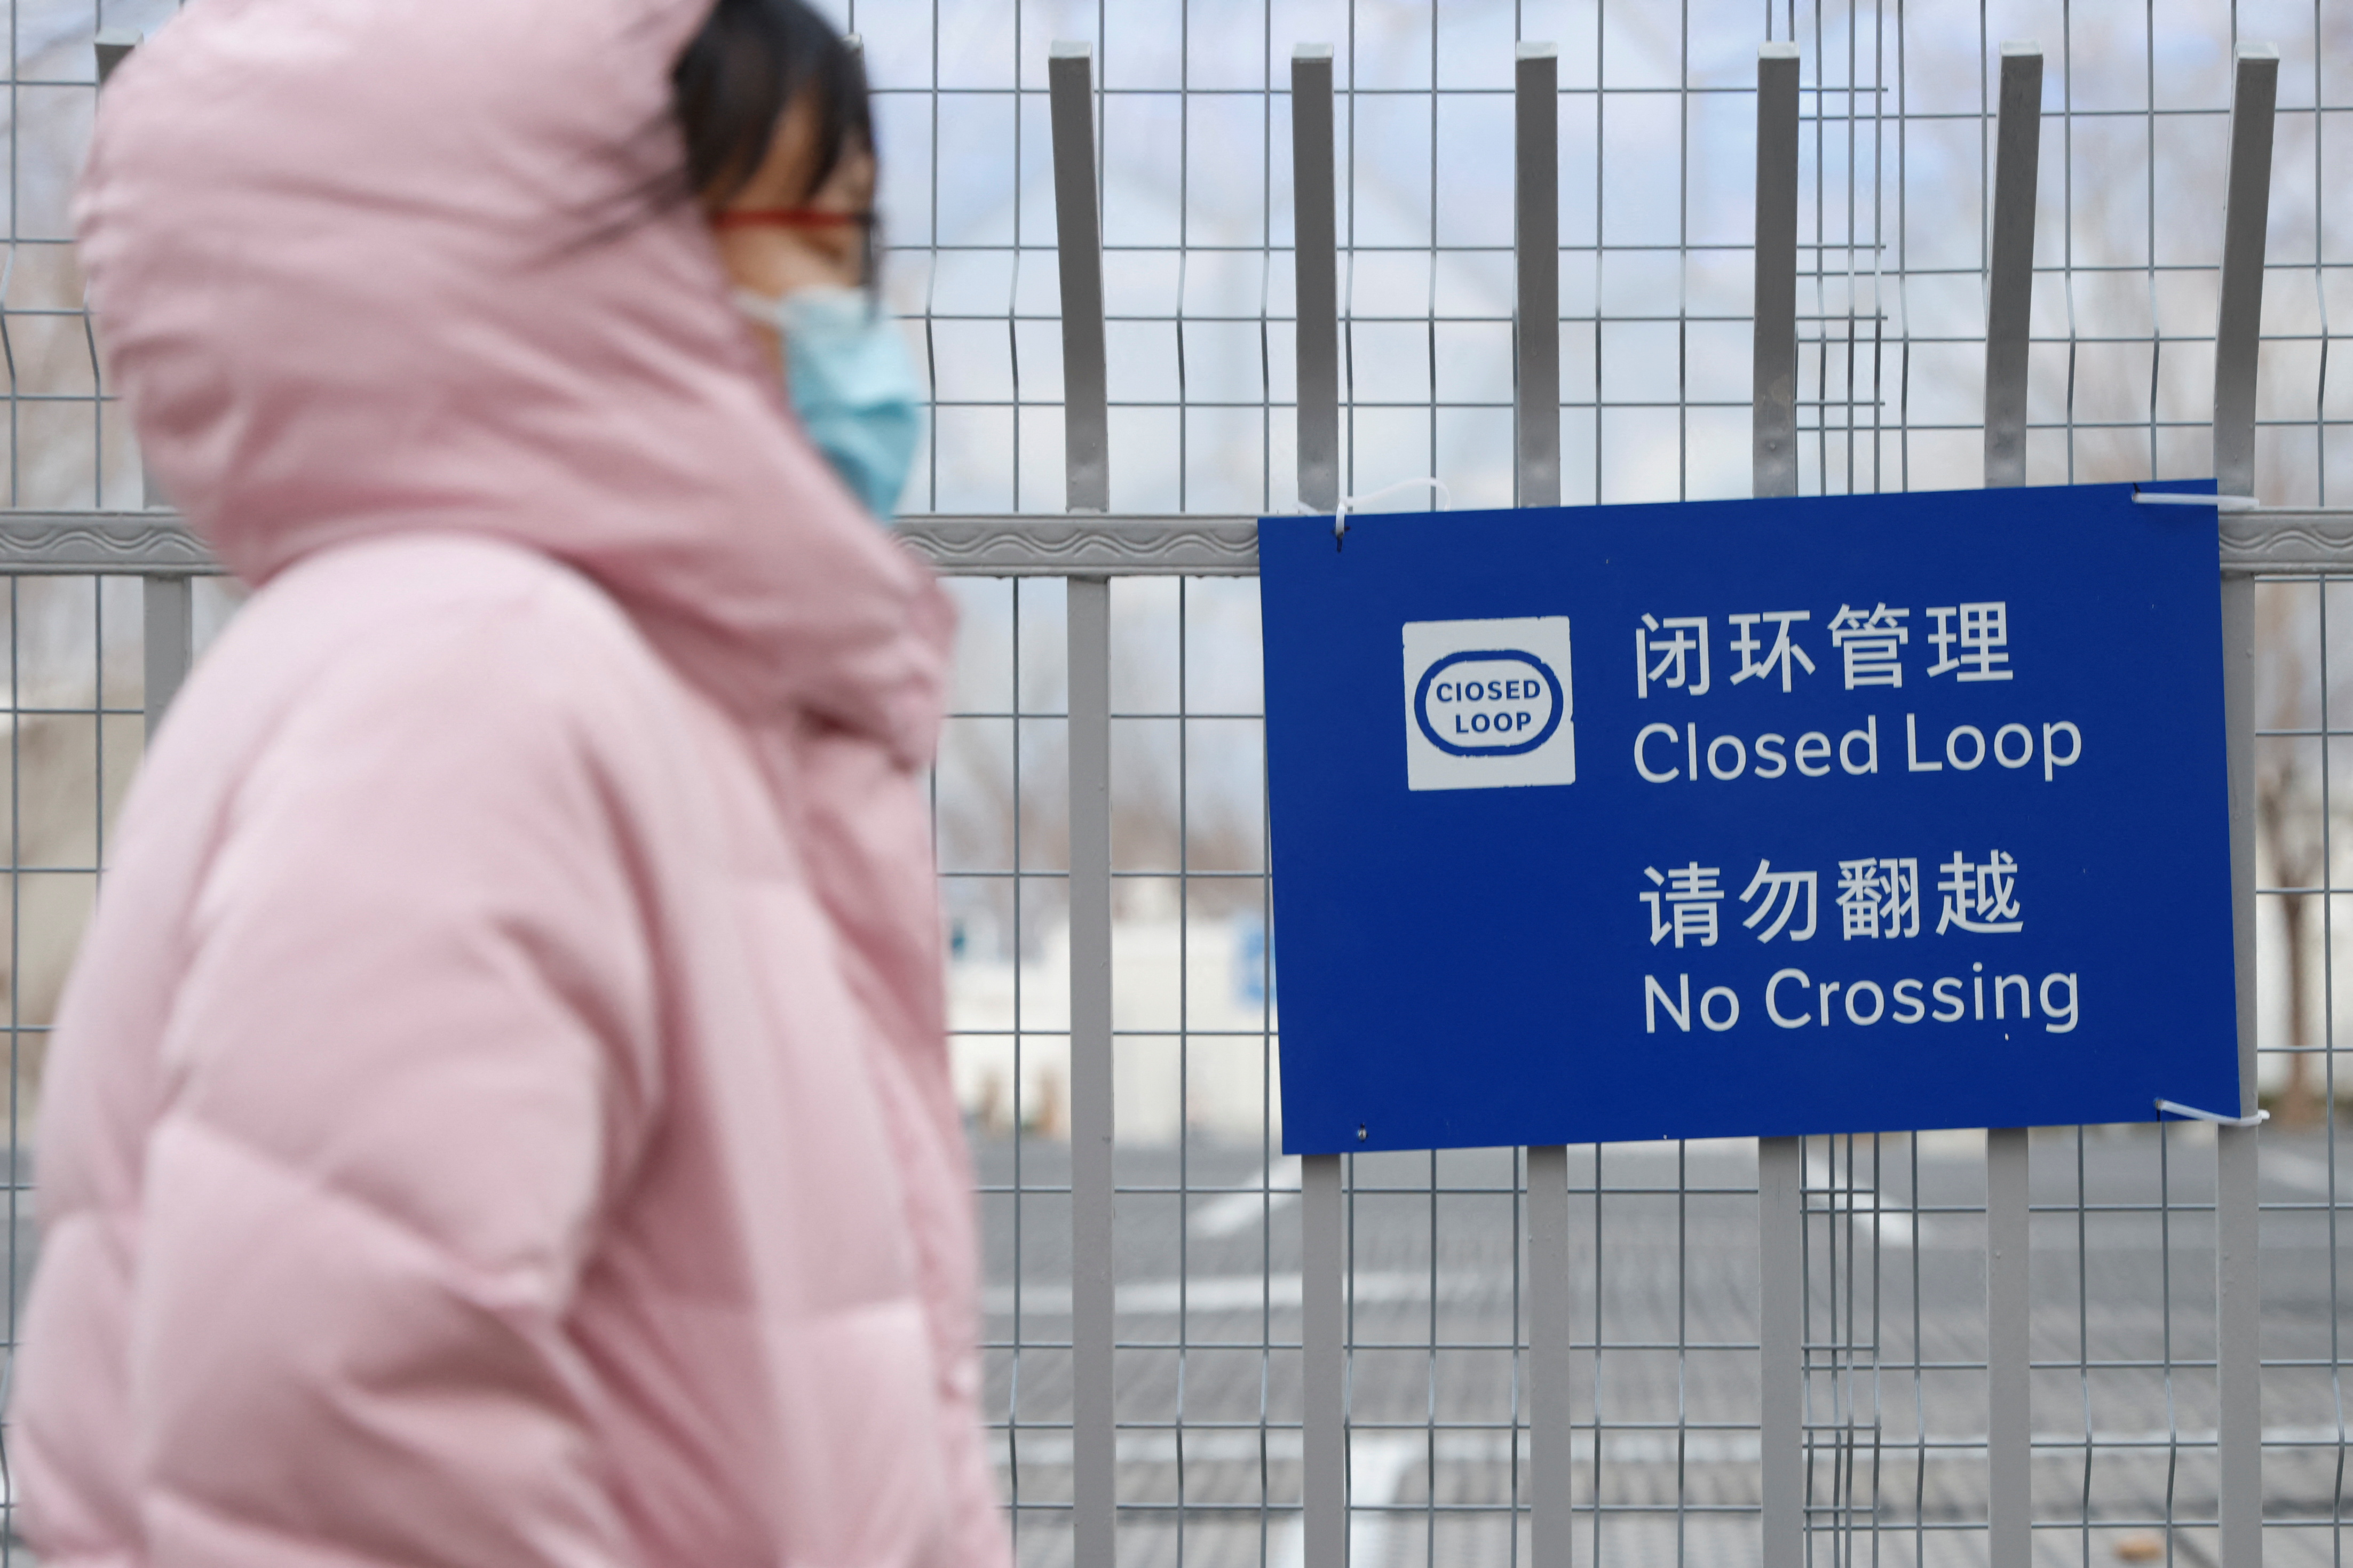 A woman walk pasts a sign on a fence marking the limit of the closed loop "bubble" area created to prevent the spread of coronavirus disease (COVID-19) during the upcoming Beijing 2022 Winter Olympics, in Beijing, China January 19, 2022. REUTERS/Carlos Garcia Rawlins